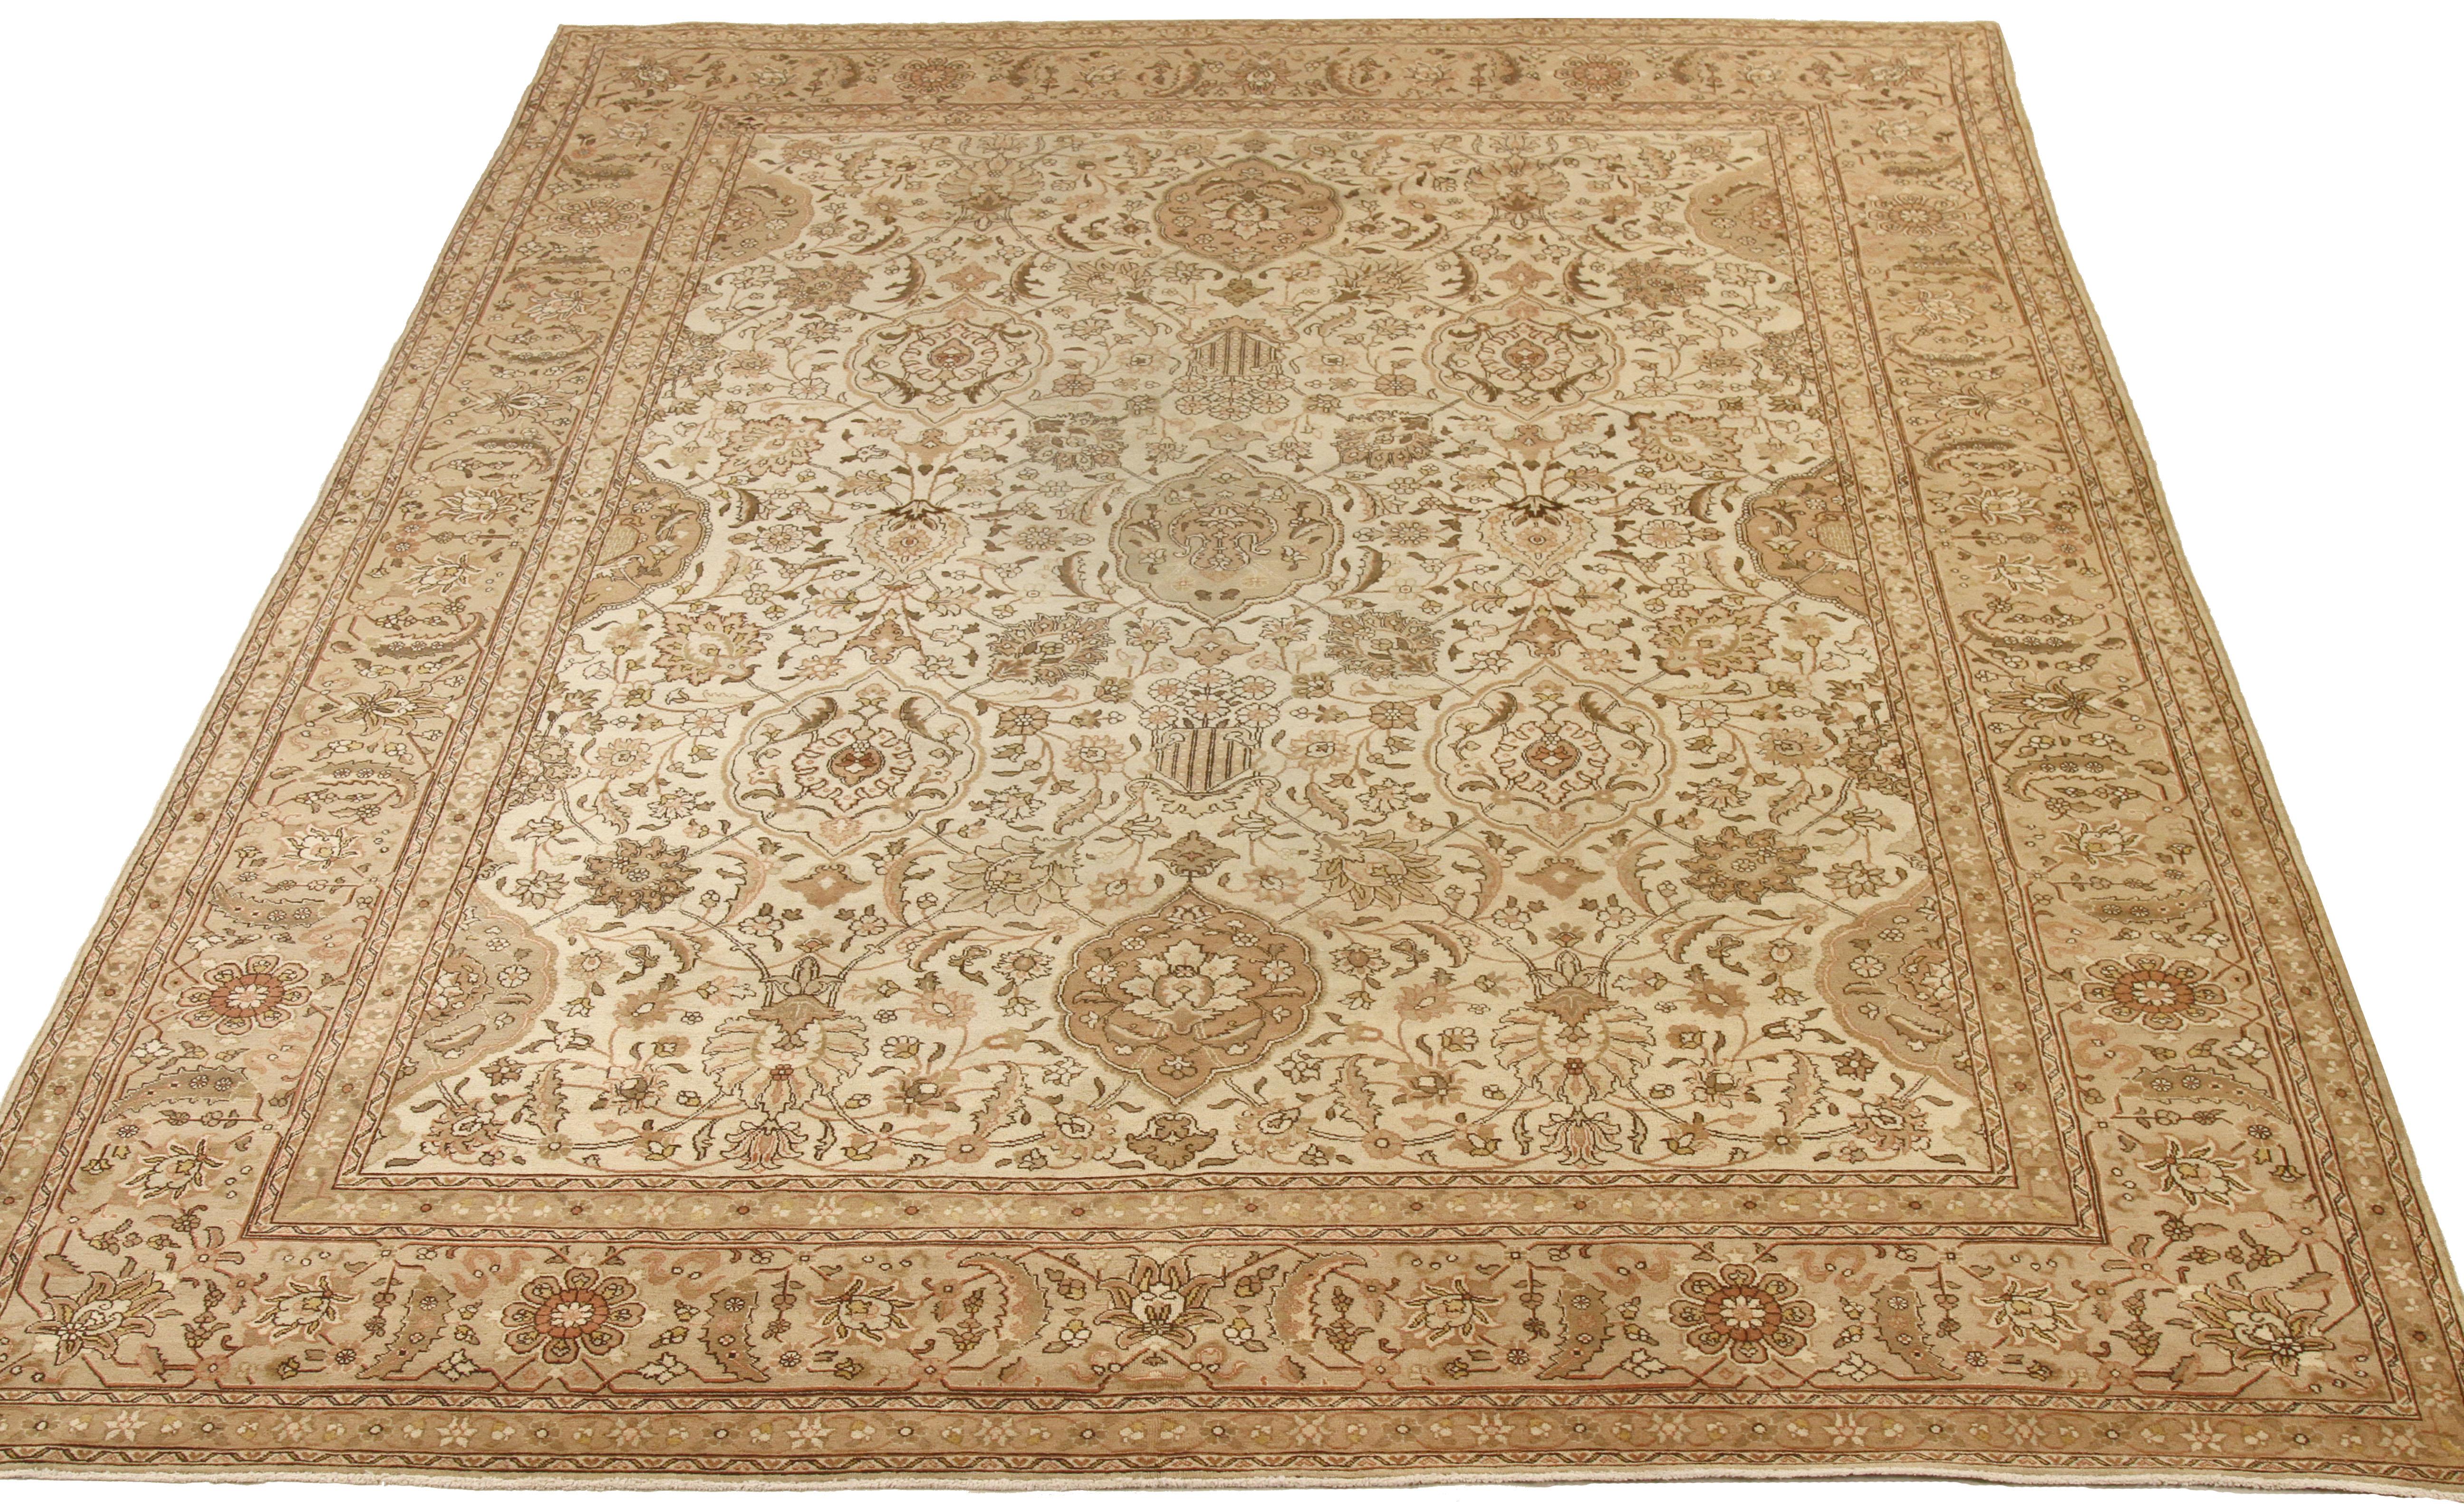 Antique mid-20th century hand-woven Persian area rug made from fine wool and all-natural vegetable dyes that are safe for people and pets. It features traditional Tabriz weaving depicting intricate botanical and animal patterns often in bold colors.